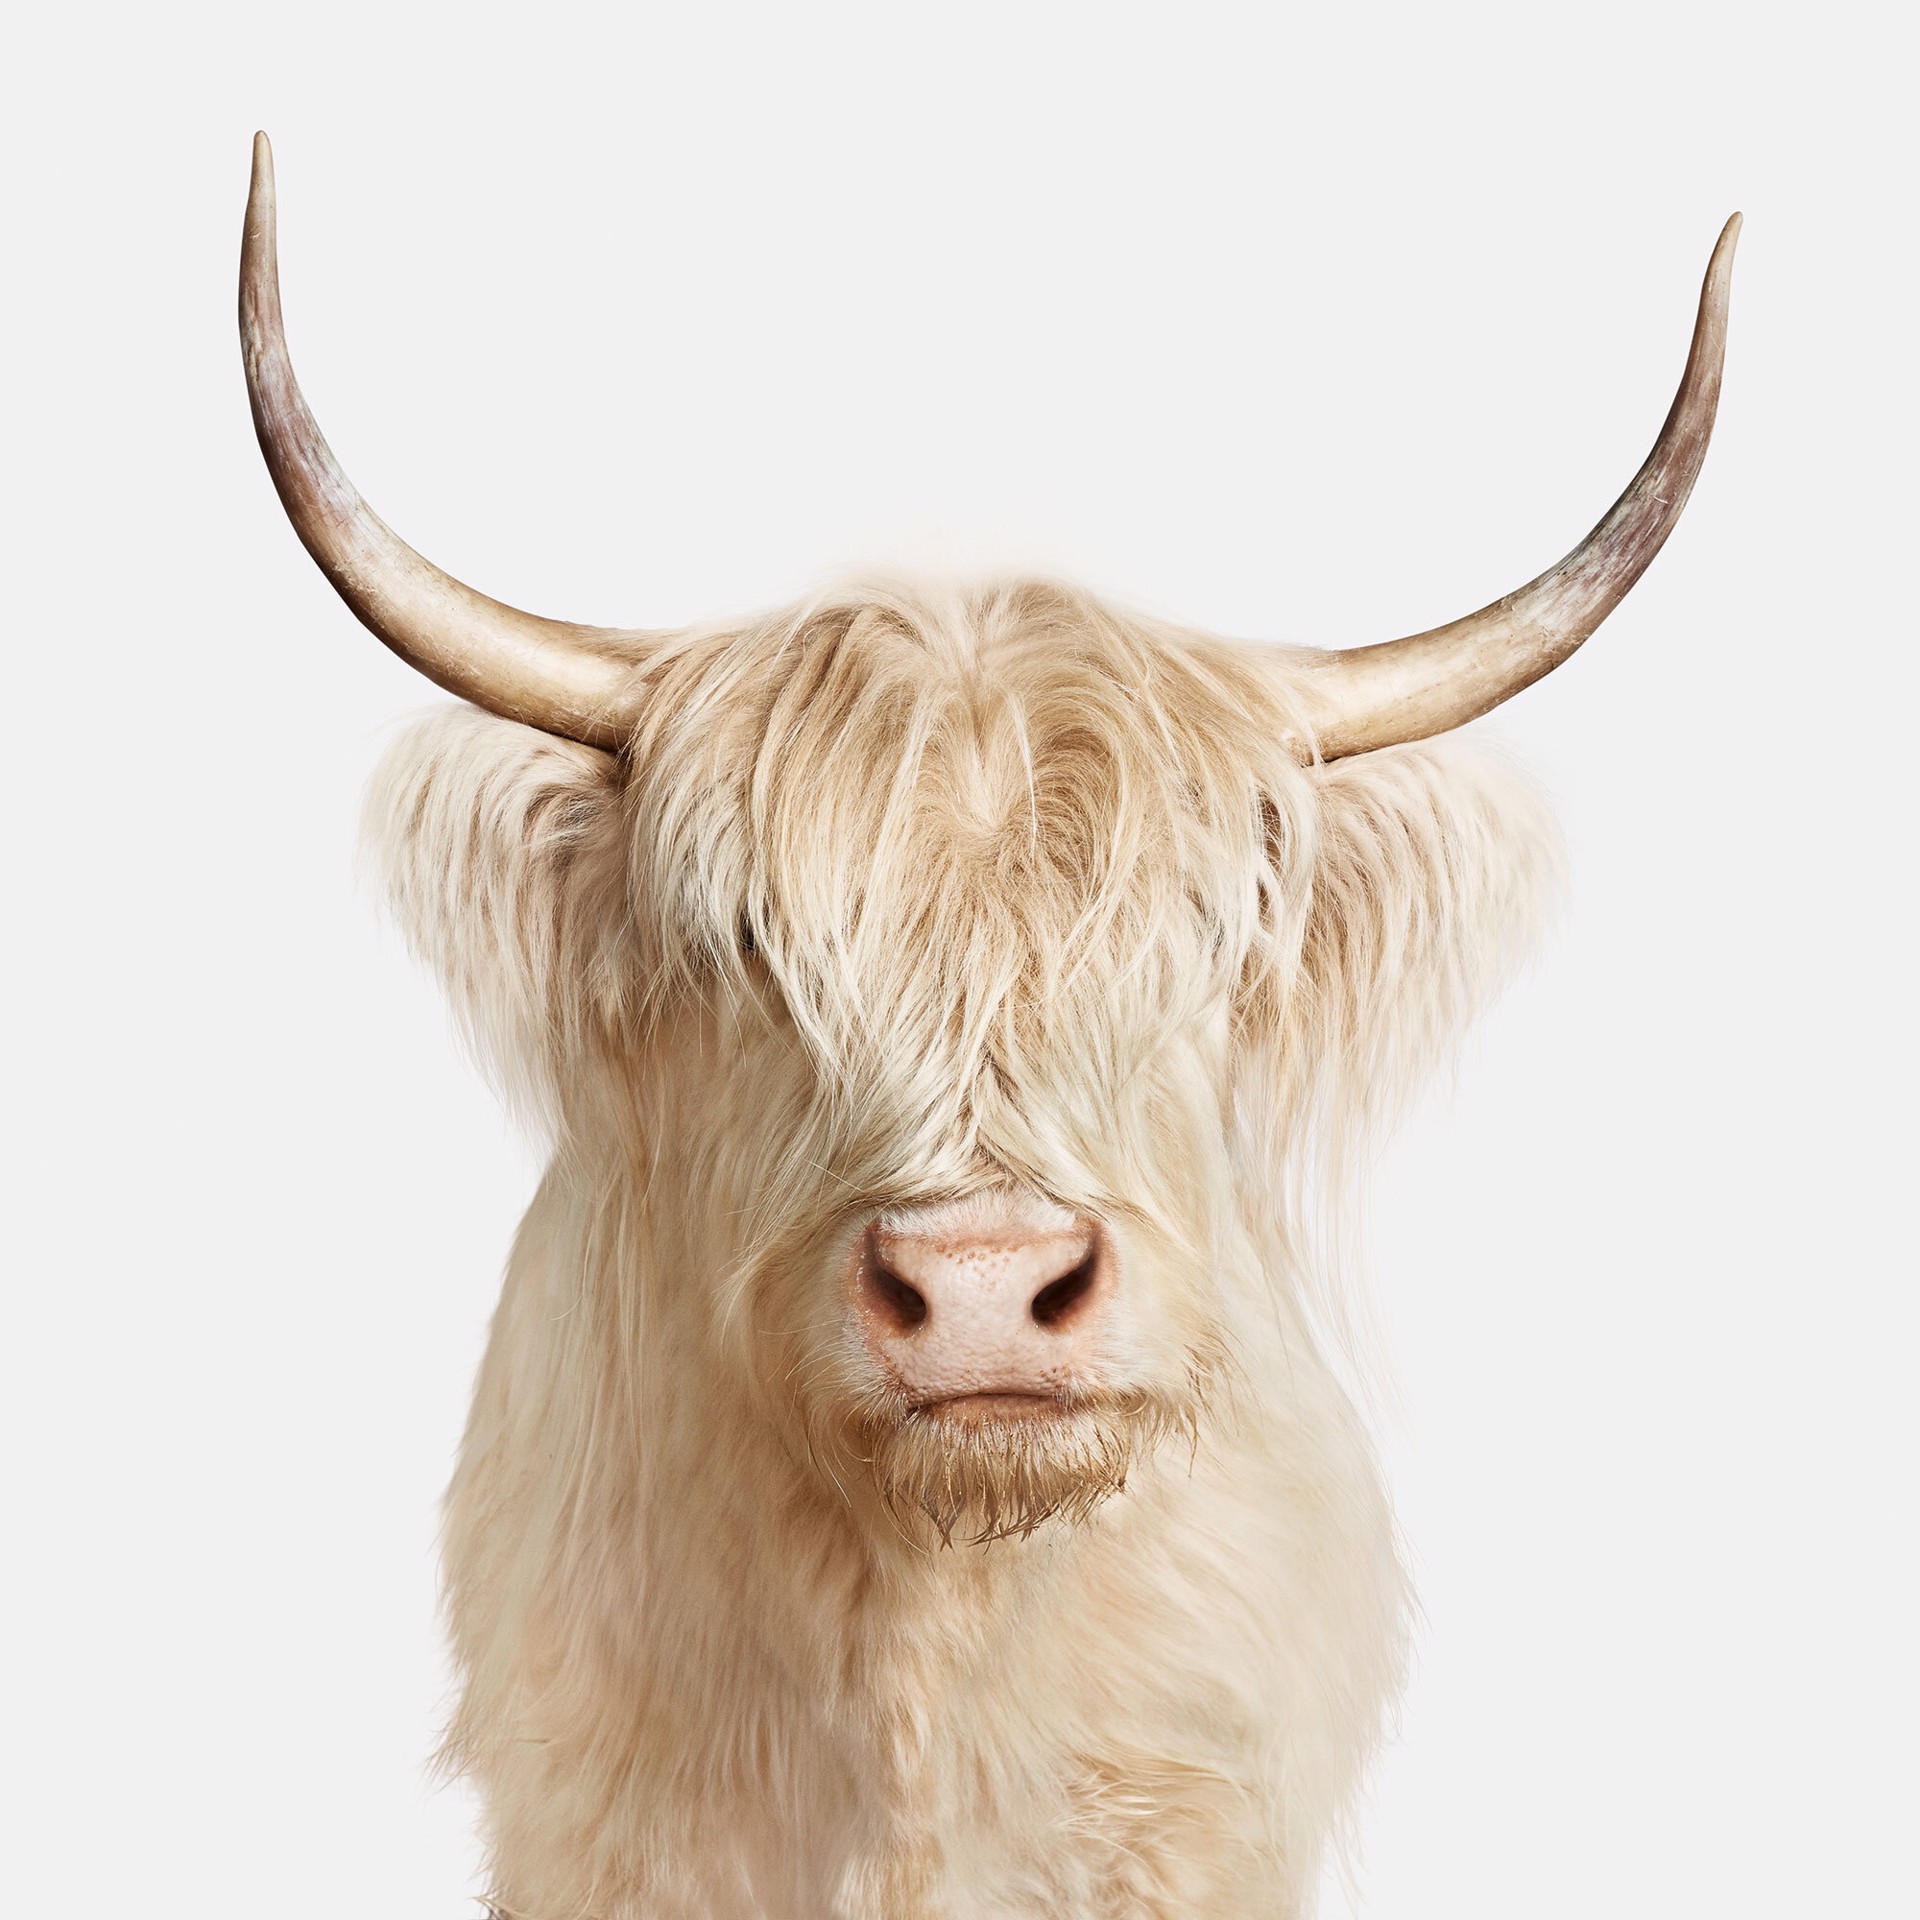 Highland Cow No. 1 by Randal Ford